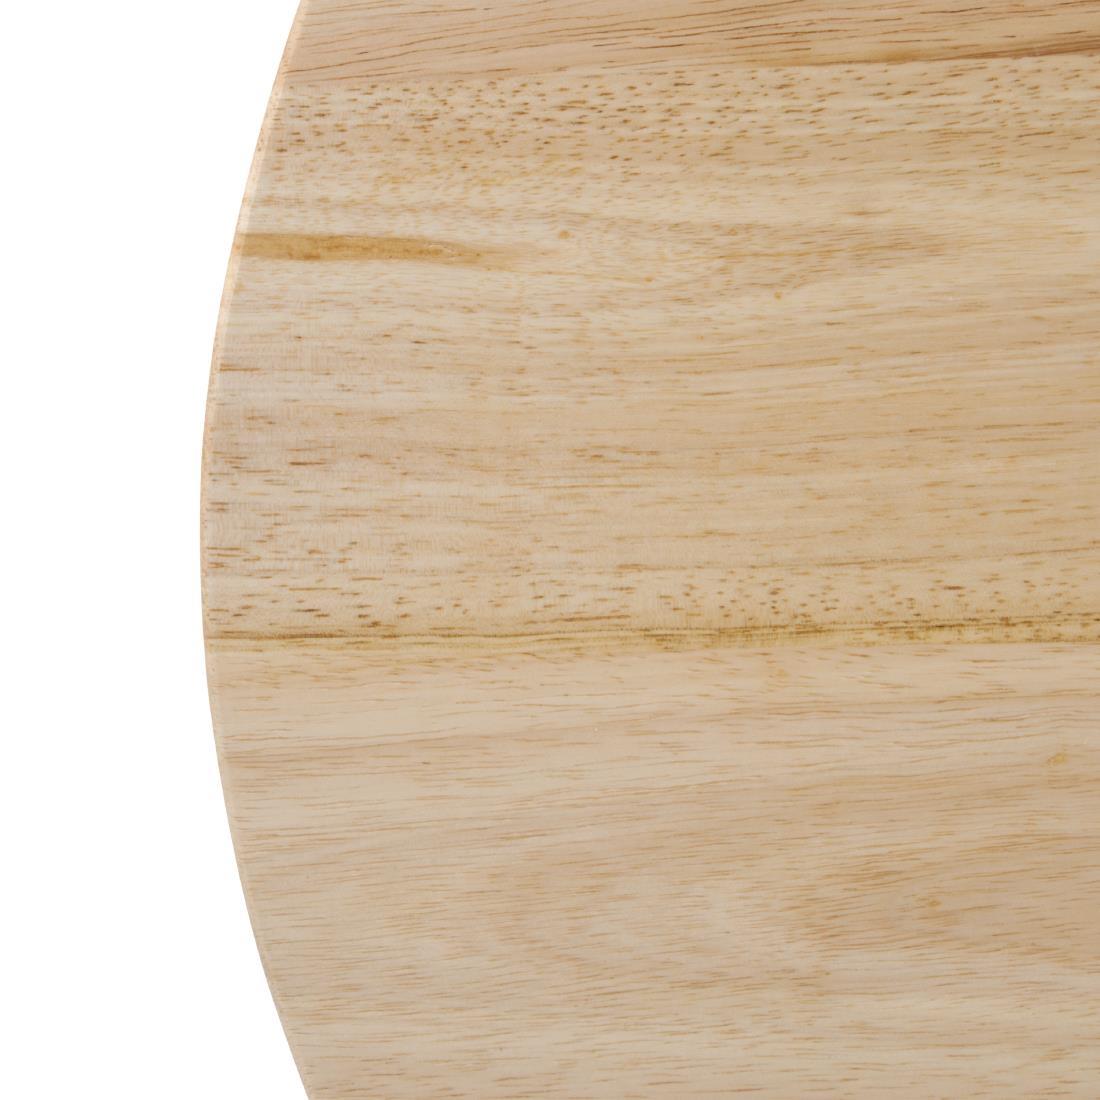 Bolero Pre-drilled Round Table Top Natural 600mm - DY738  - 3